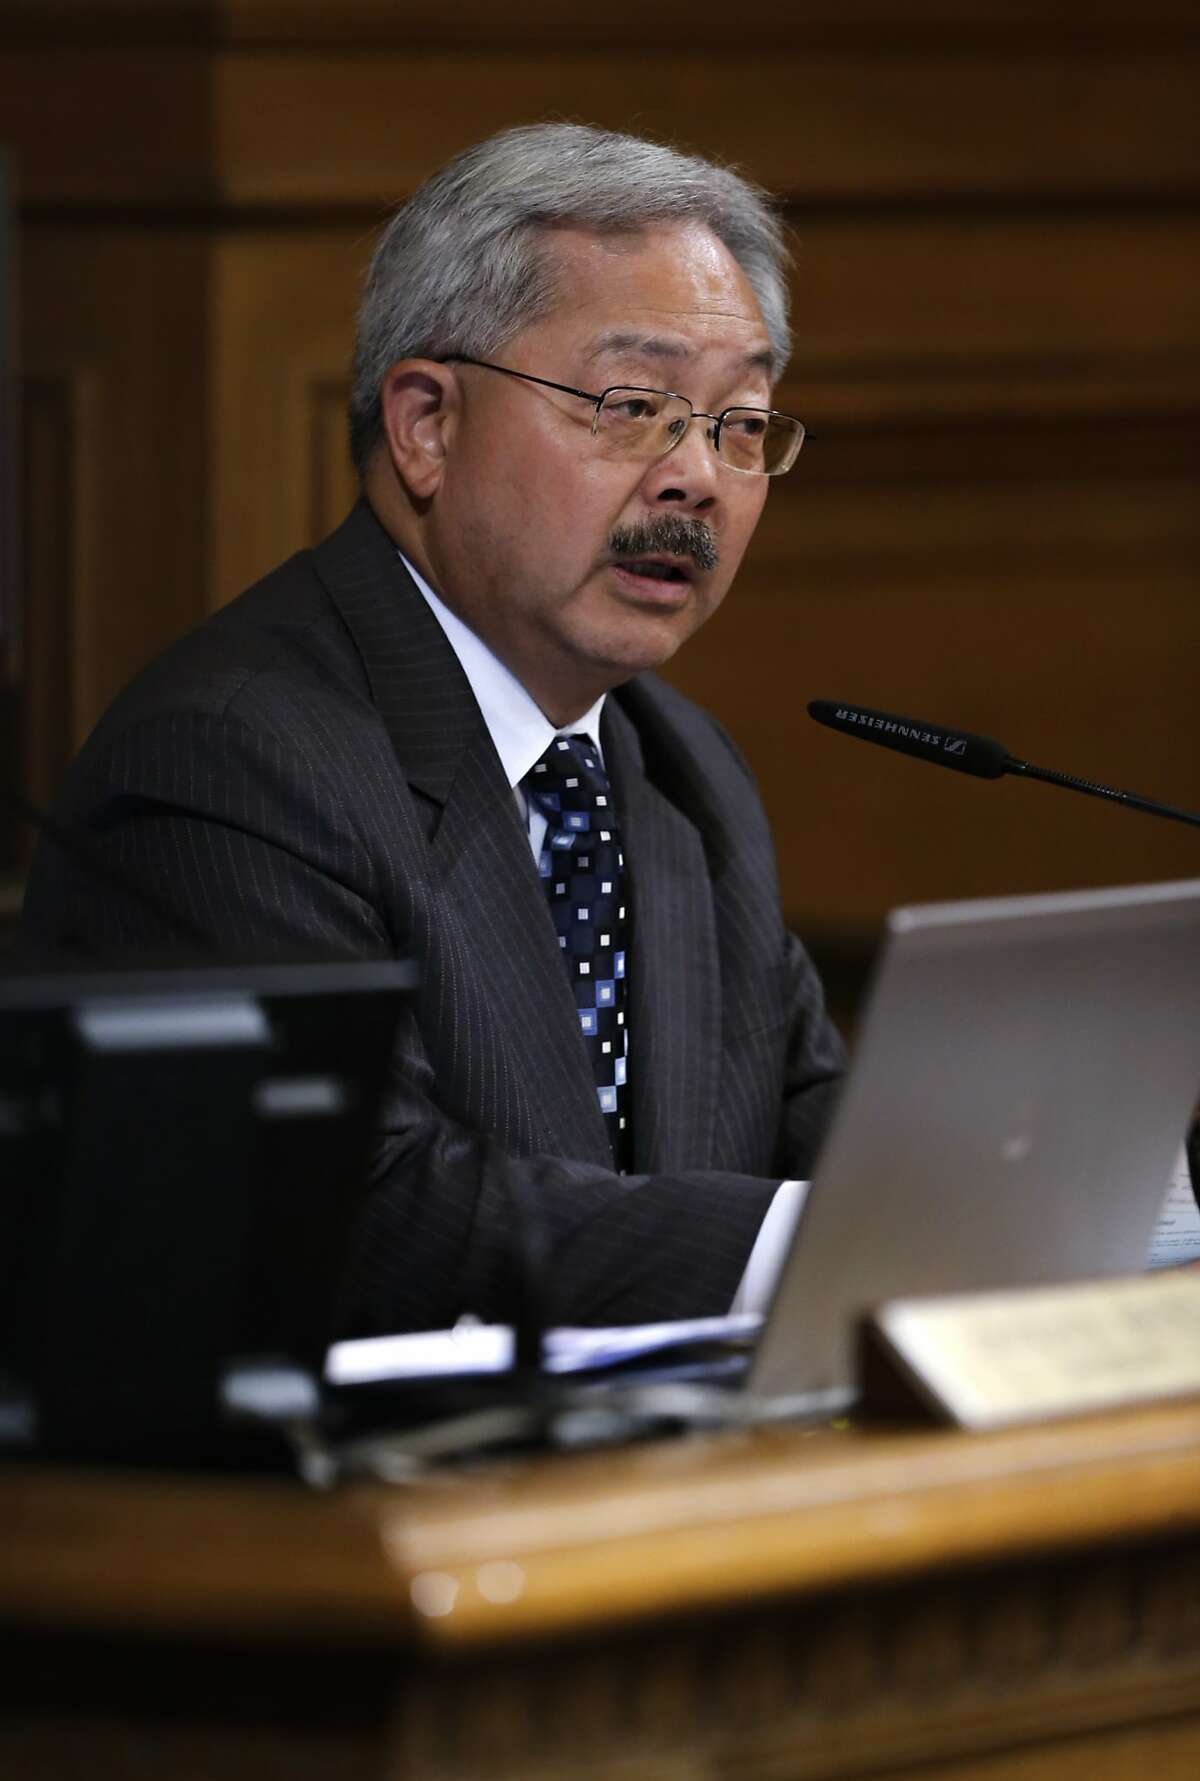 Mayor Ed Lee comments to the board as the San Francisco Board of Supervisors prepared to vote on competing measures to regulate Airbnb and other short-term rental services in San Francisco, Calif., on Tues. July 14, 2015.